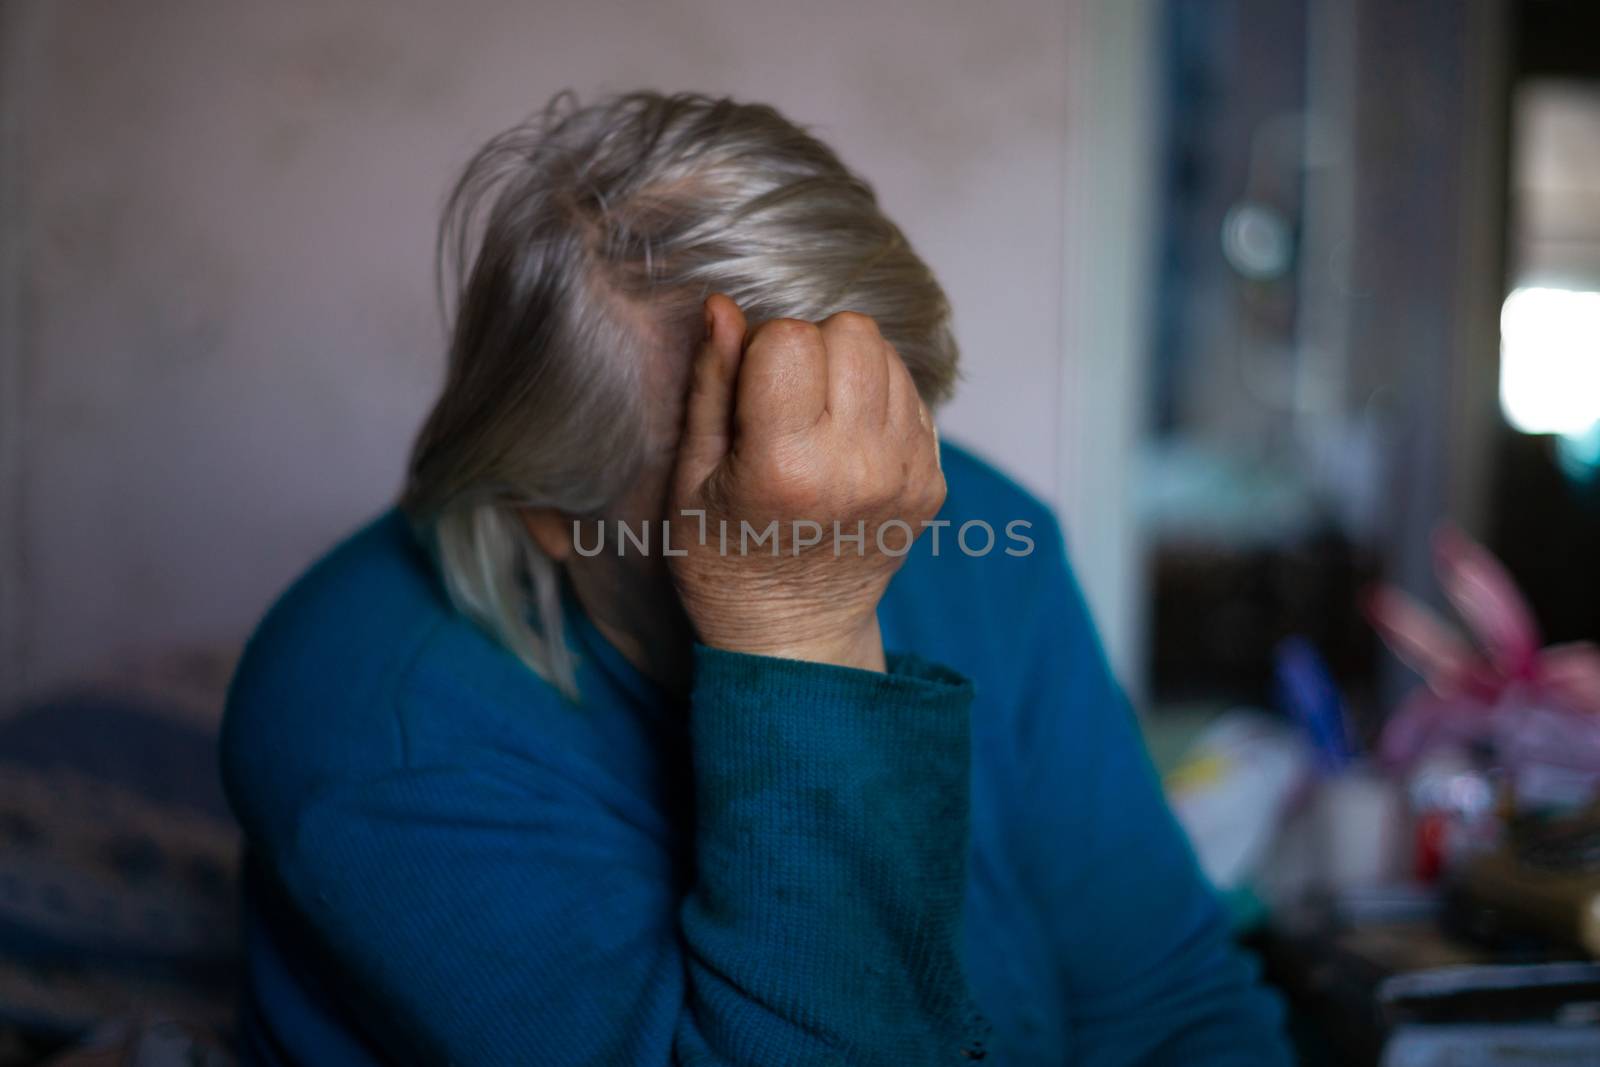 Old poor gray hair woman covered her face with her hand. Woman is sad. Poor life in village. Old age not good. Low-light photo.